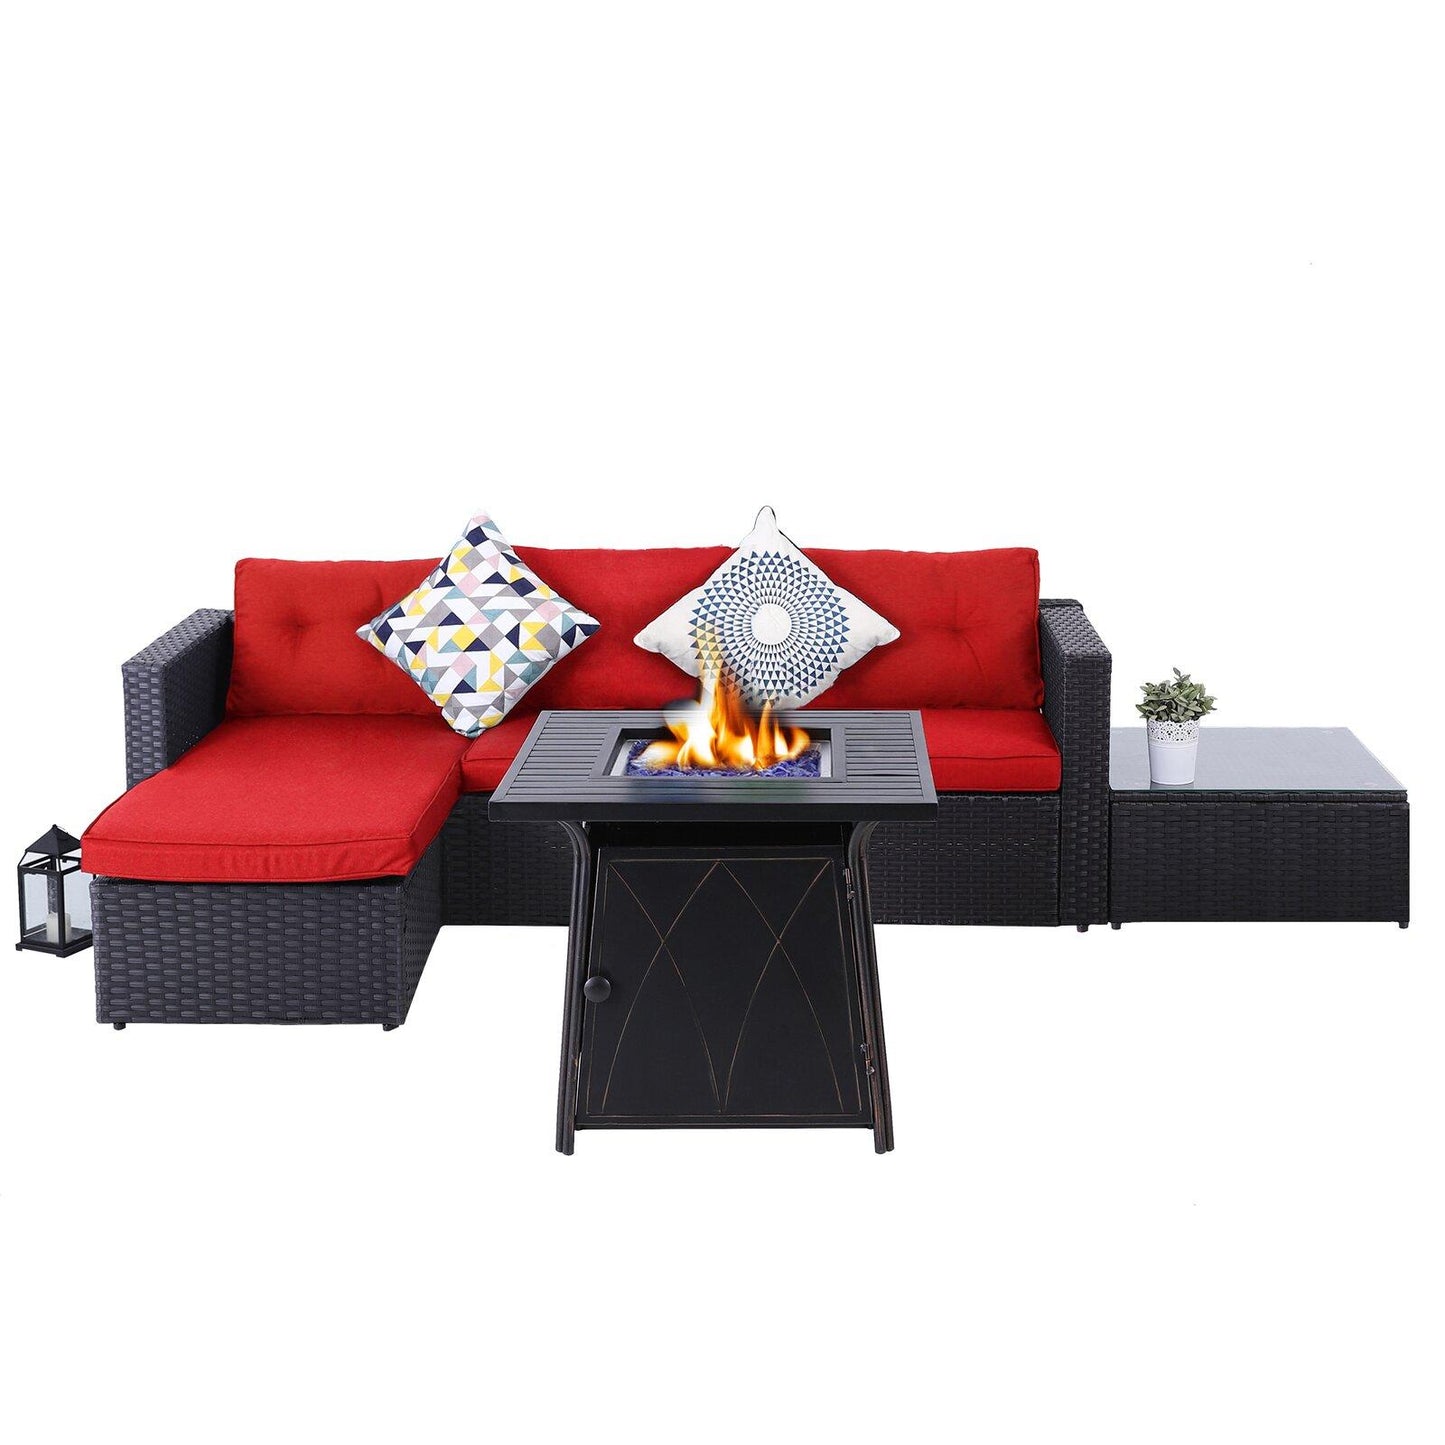 Sophia & William 4-Piece Rattan Patio Conversation Set Outdoor Sectionals with Fire Pit Table - Red